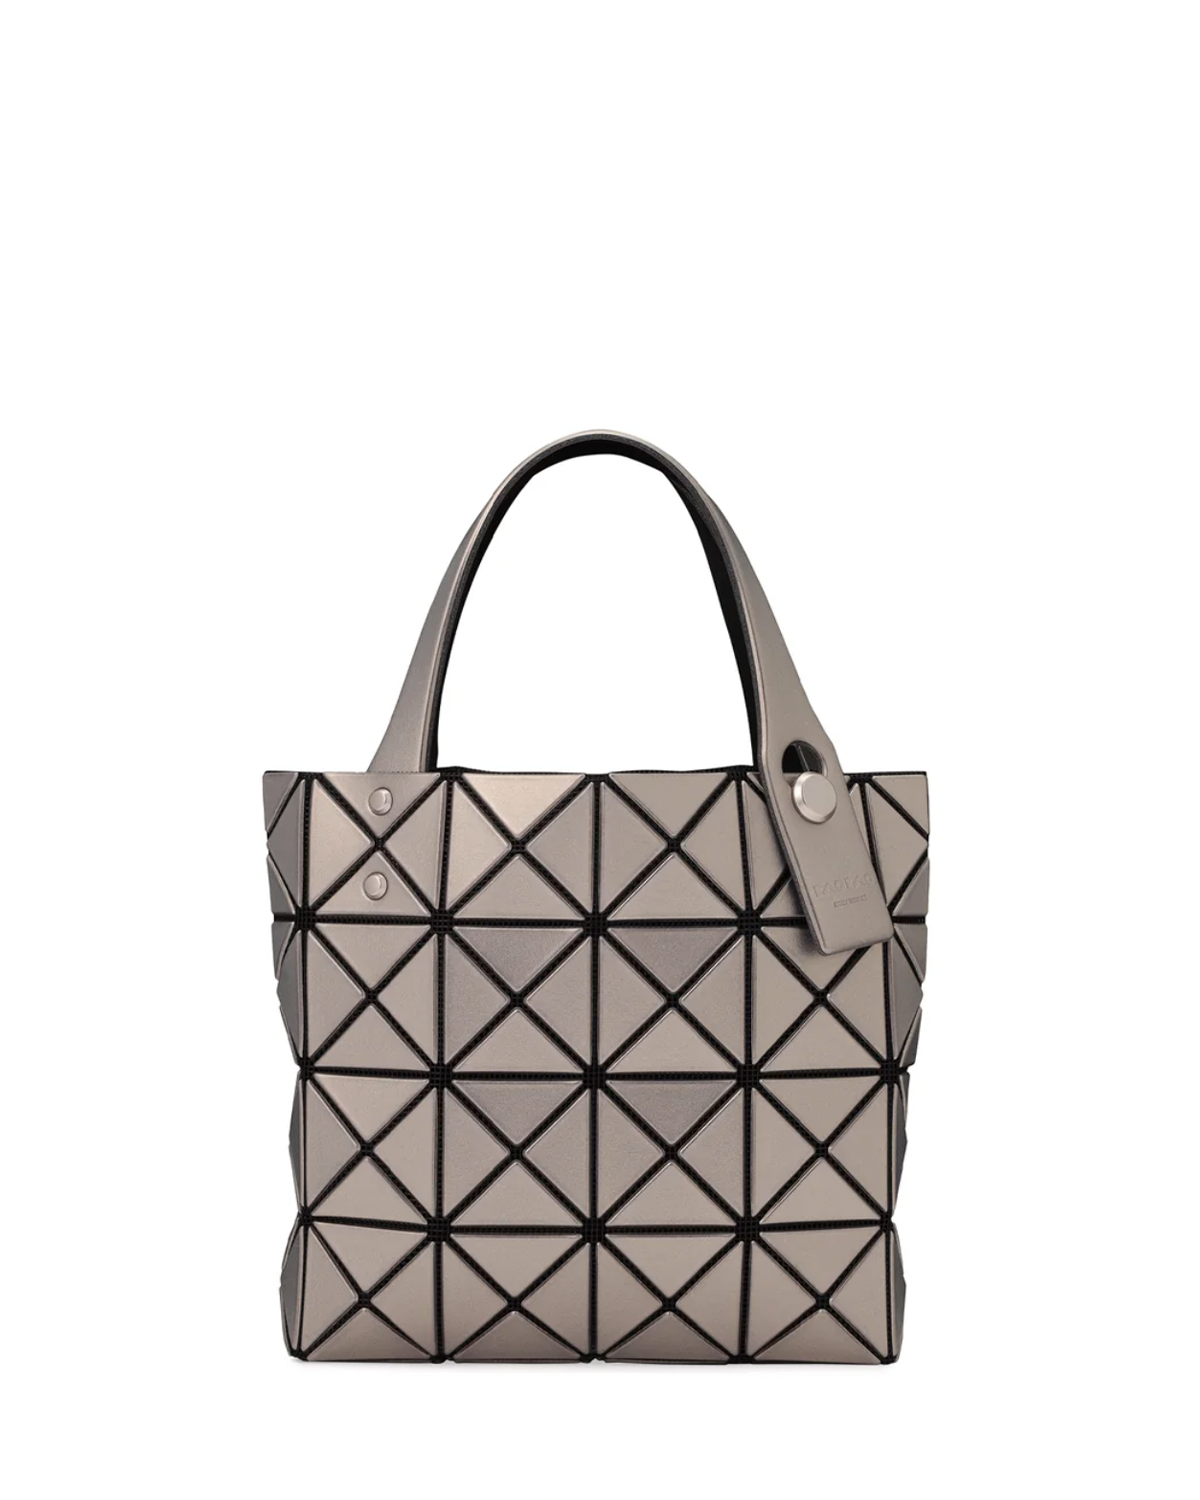 Lucent Boxy Bag Silver (no.91)